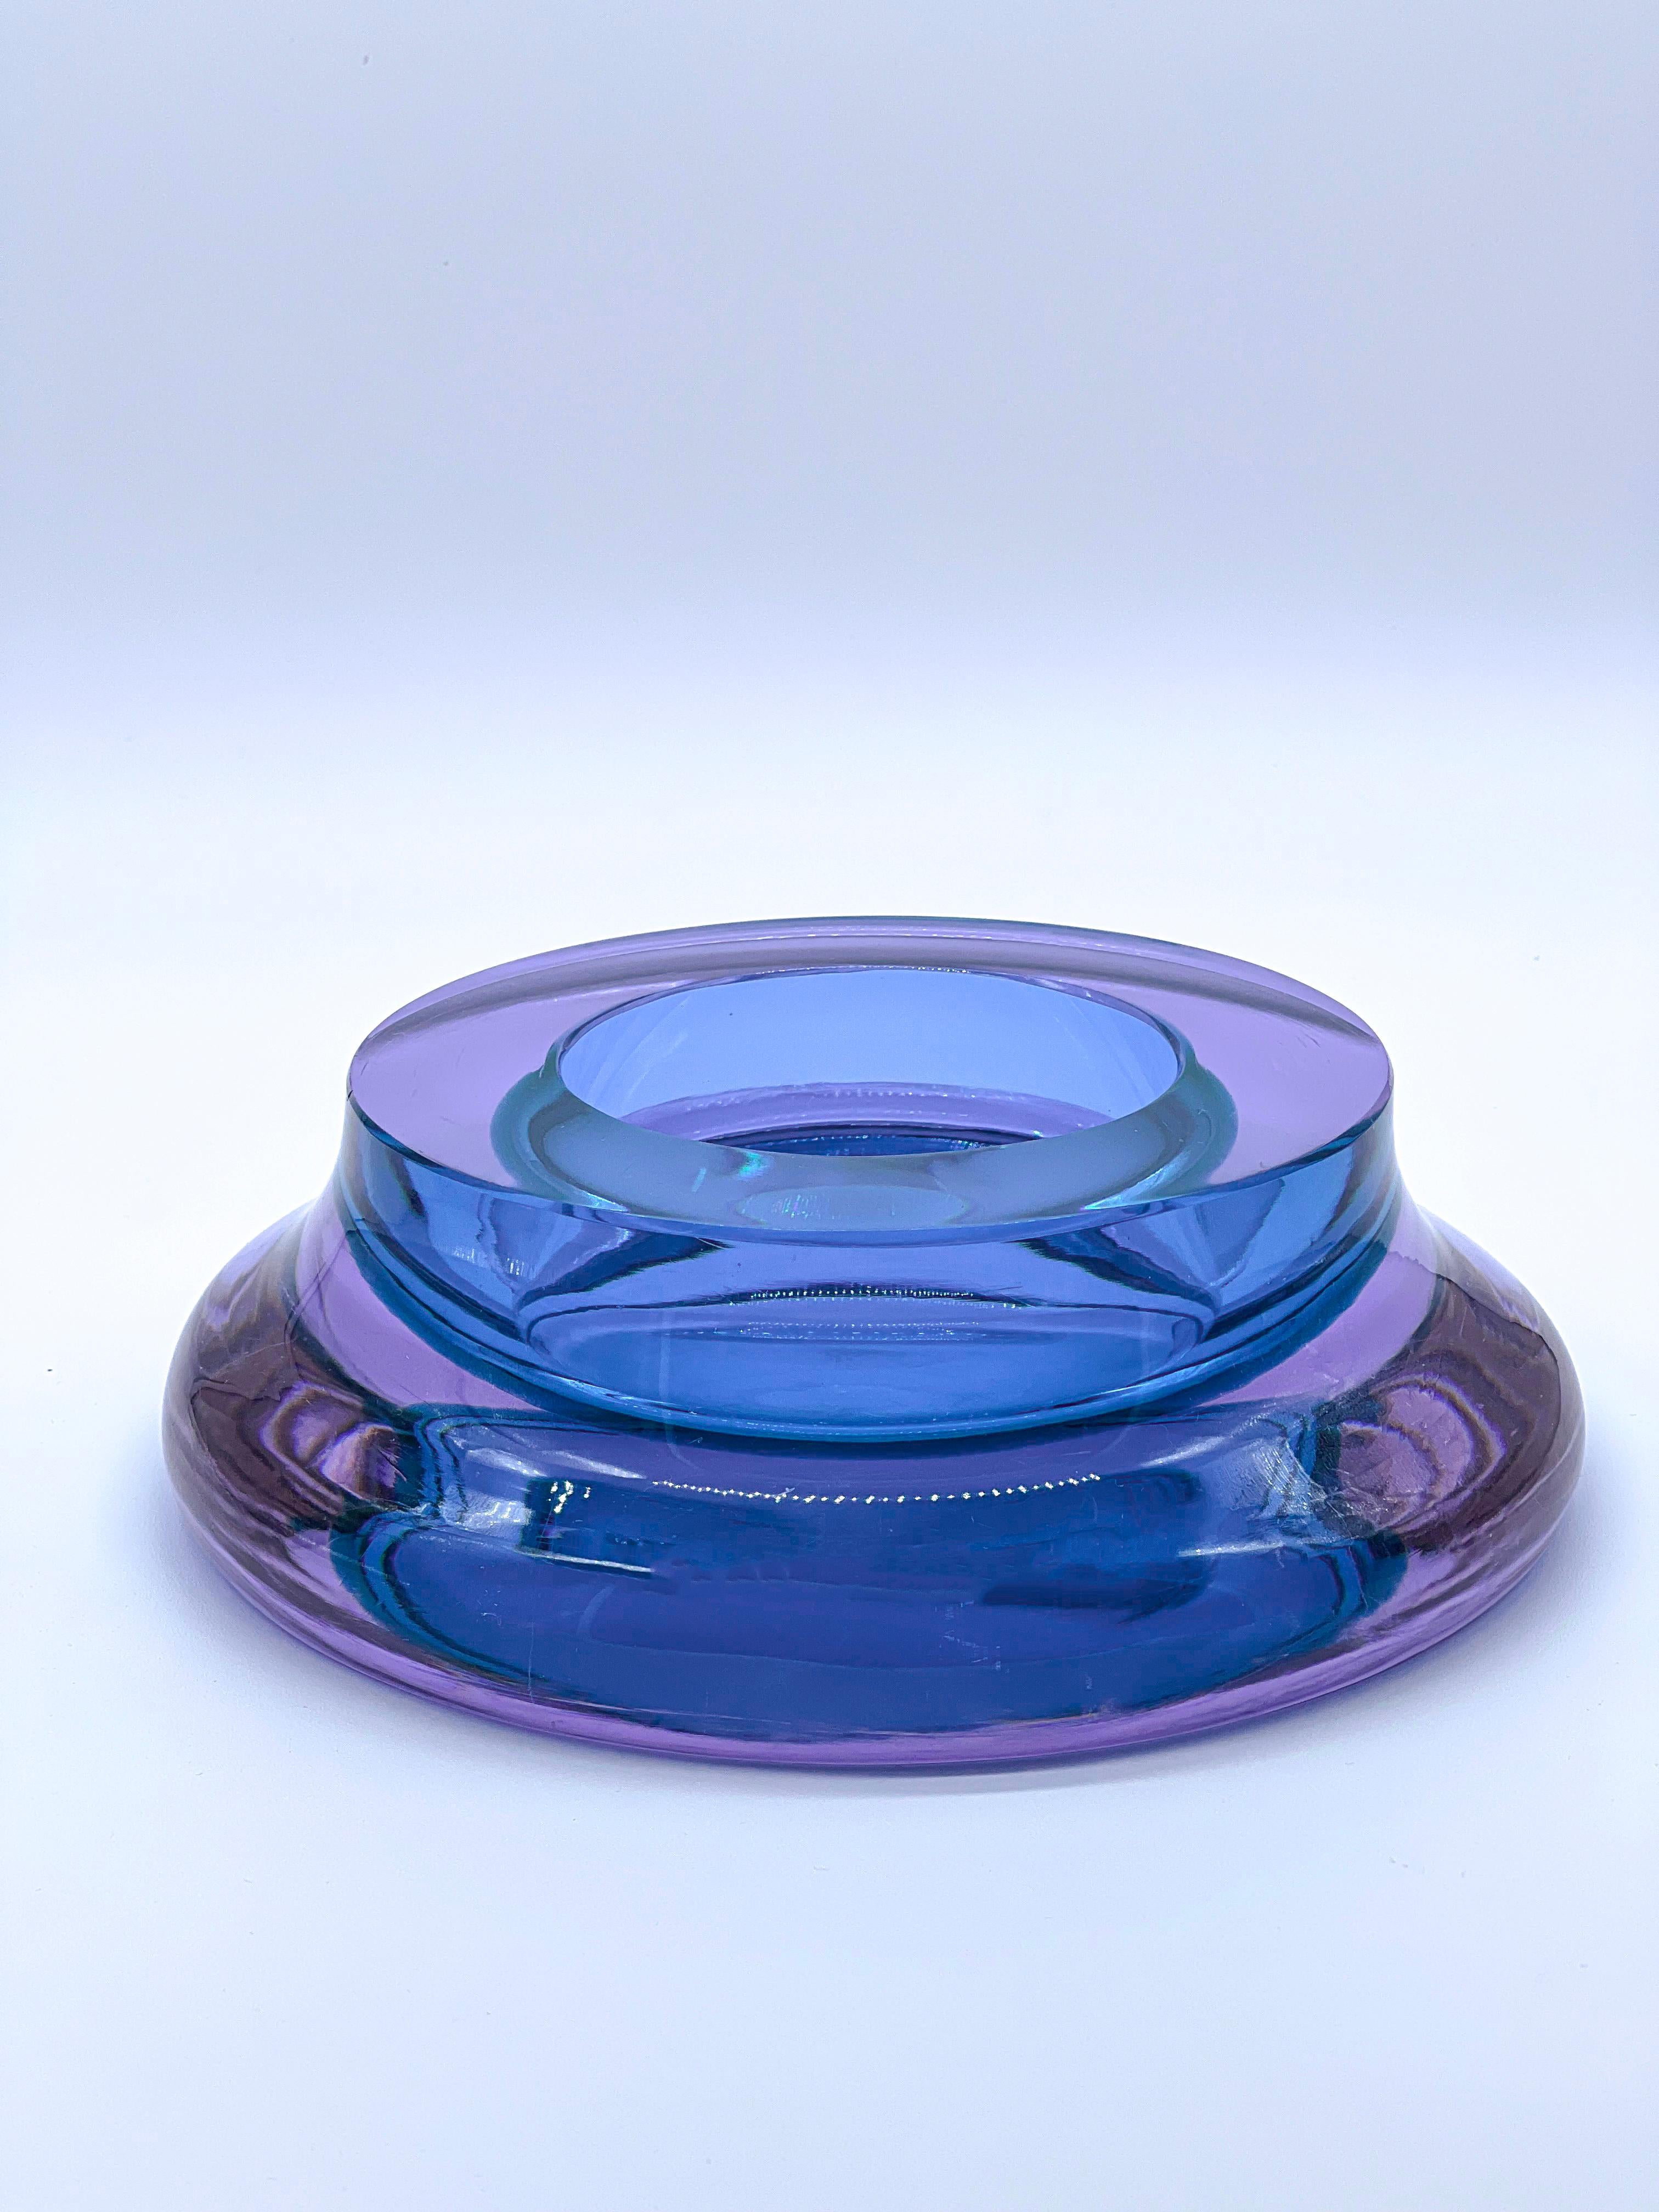 Stunning valet tray in thick Murano glass. The peculiar lavender-ish hue, known as 